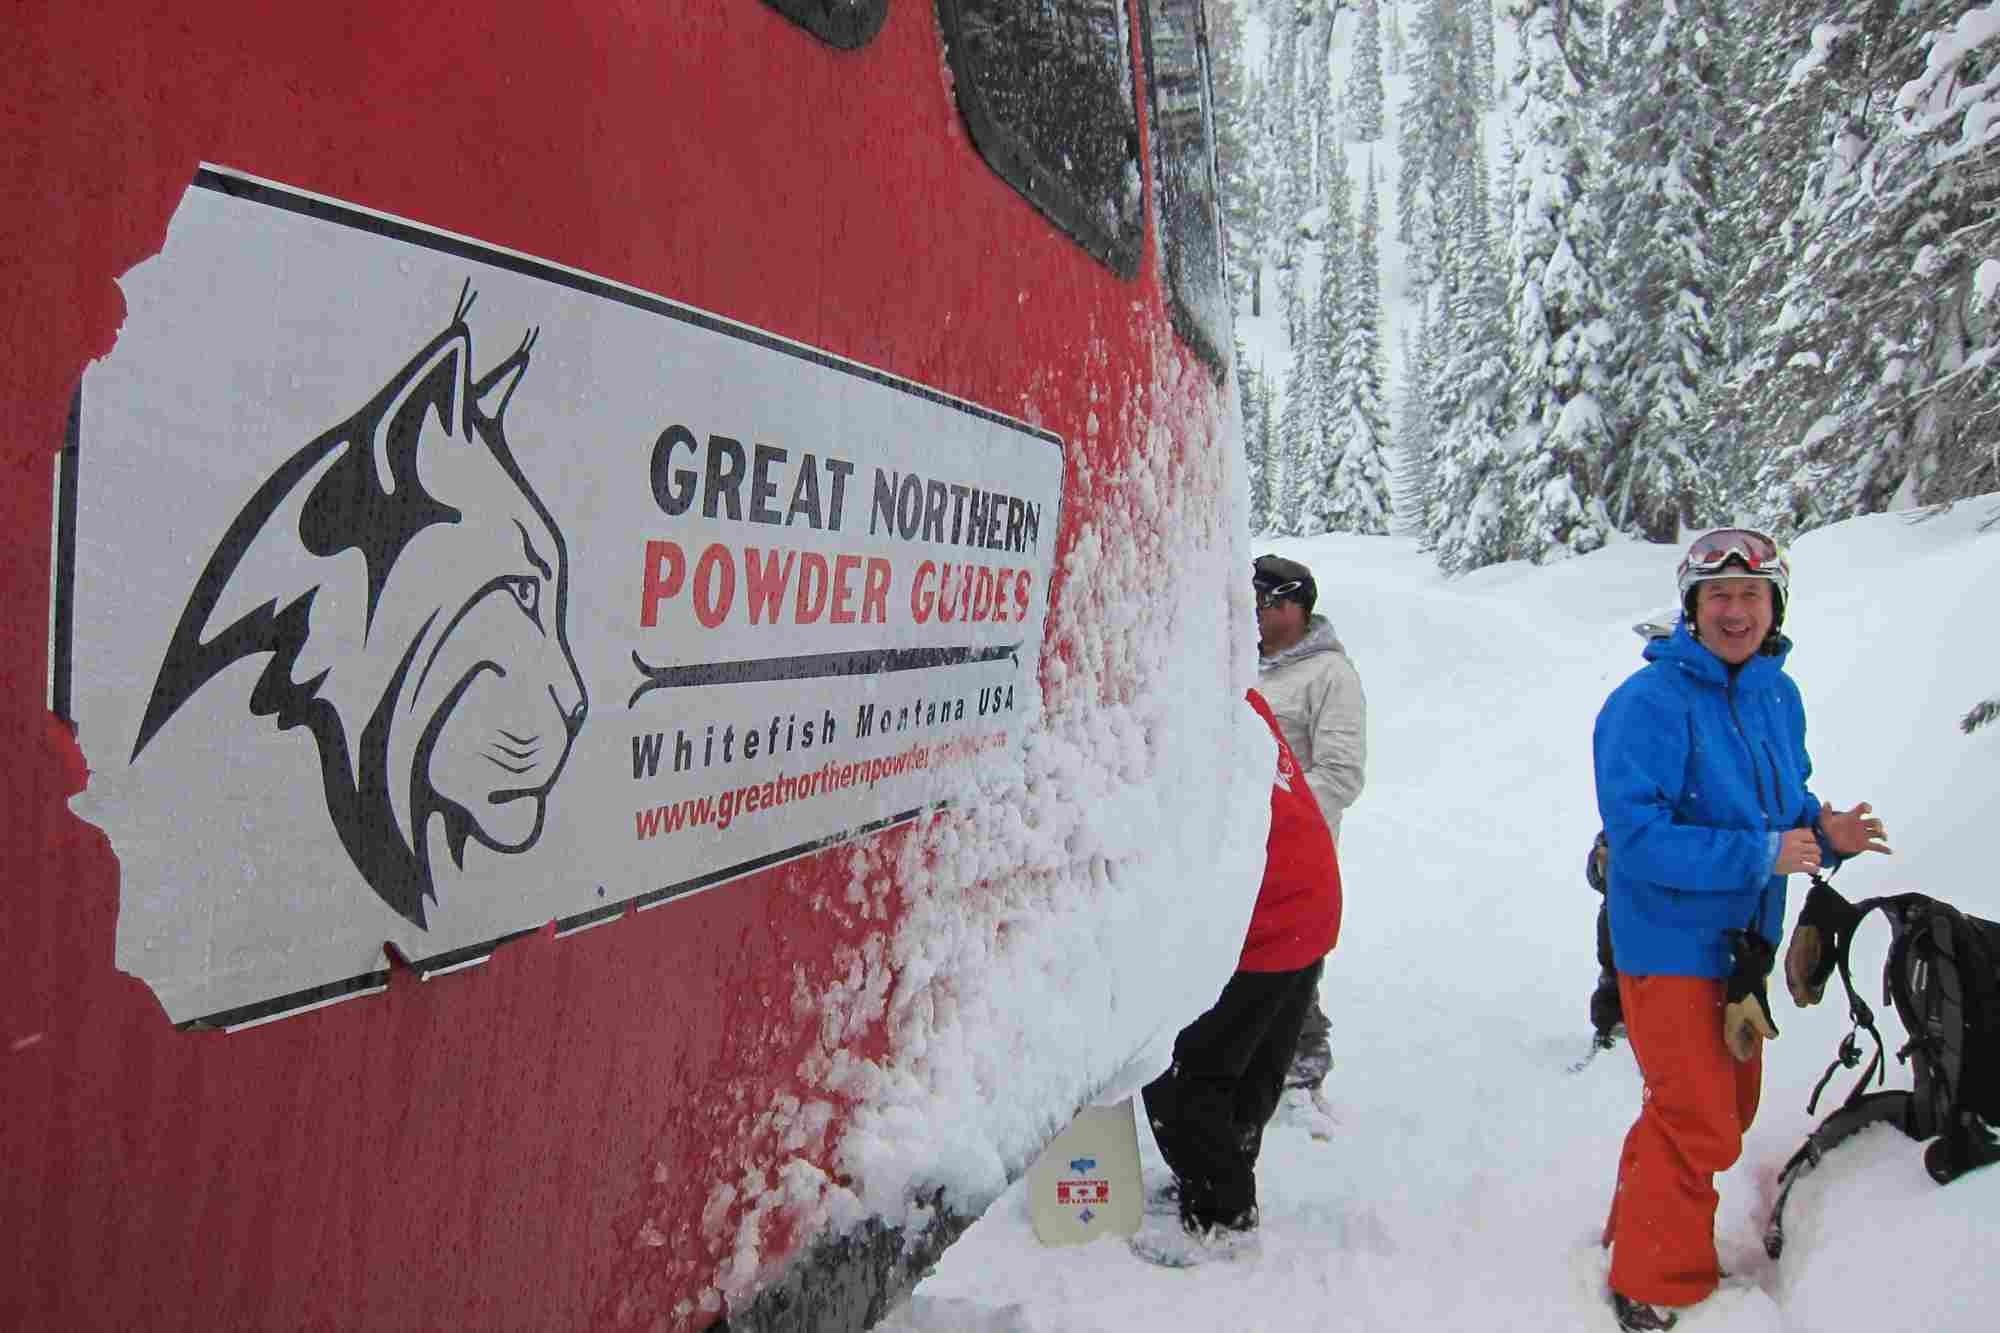 the great northern powder guides cat in whitefish montana